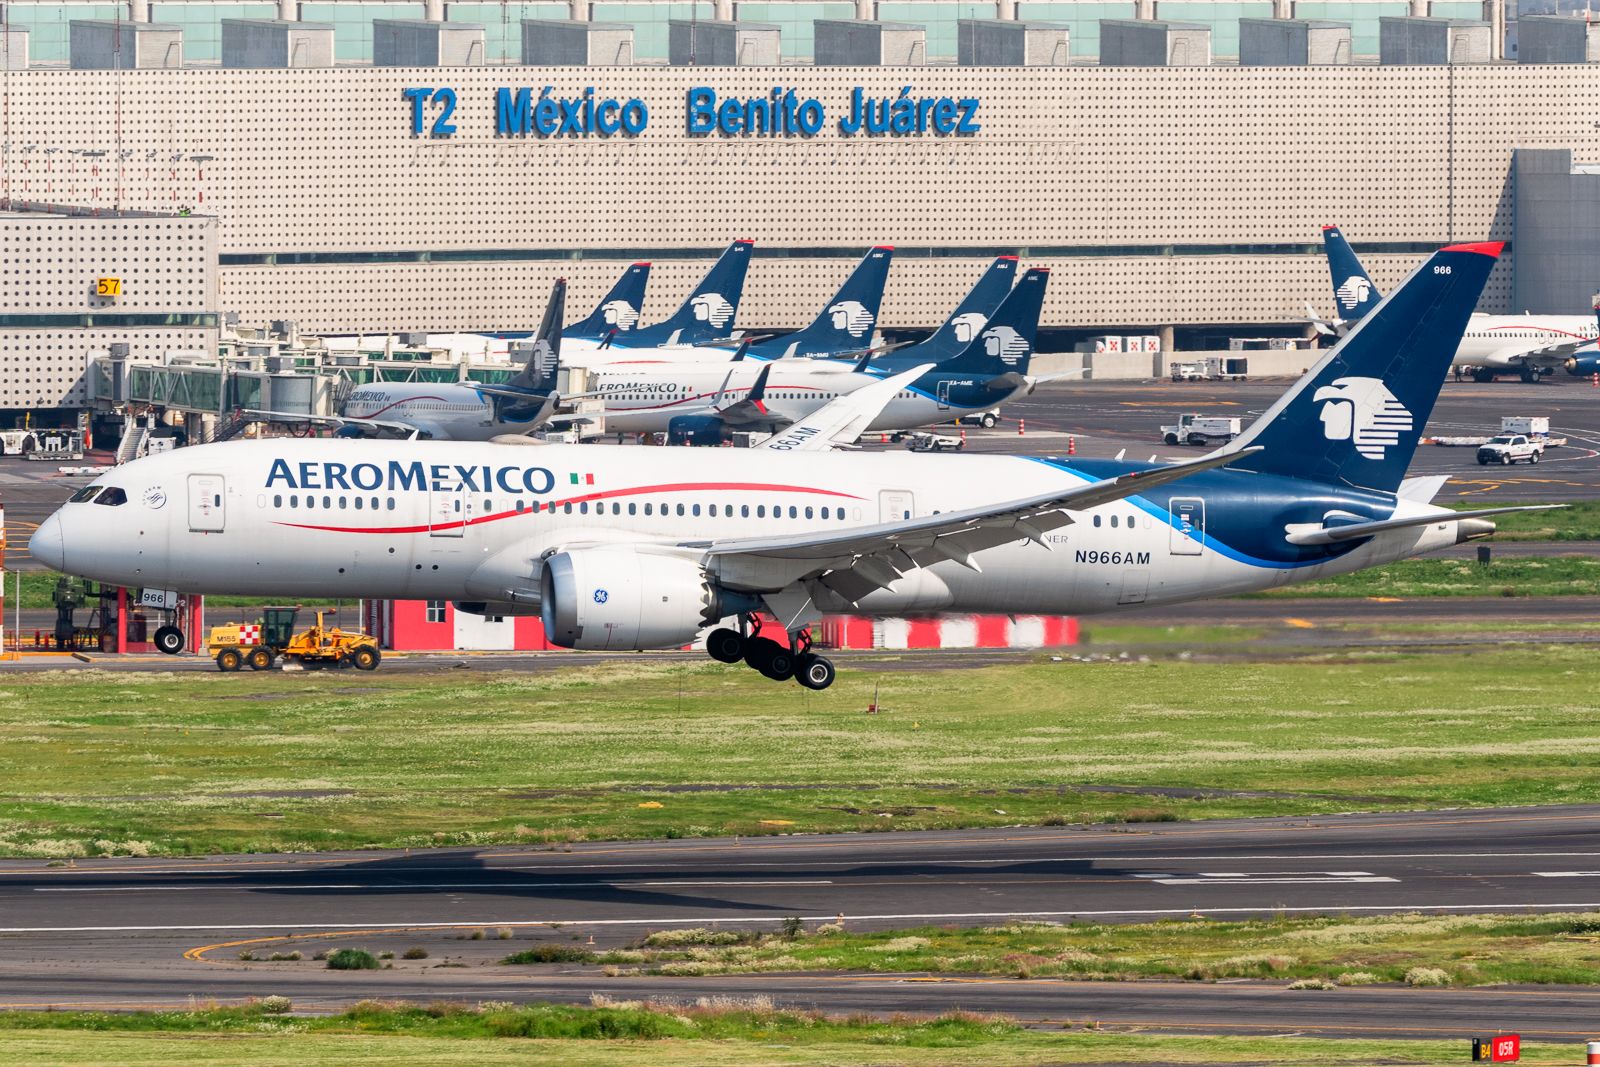 Future Mexico City Flight Launches Will Be Forced To Use Its New Airport